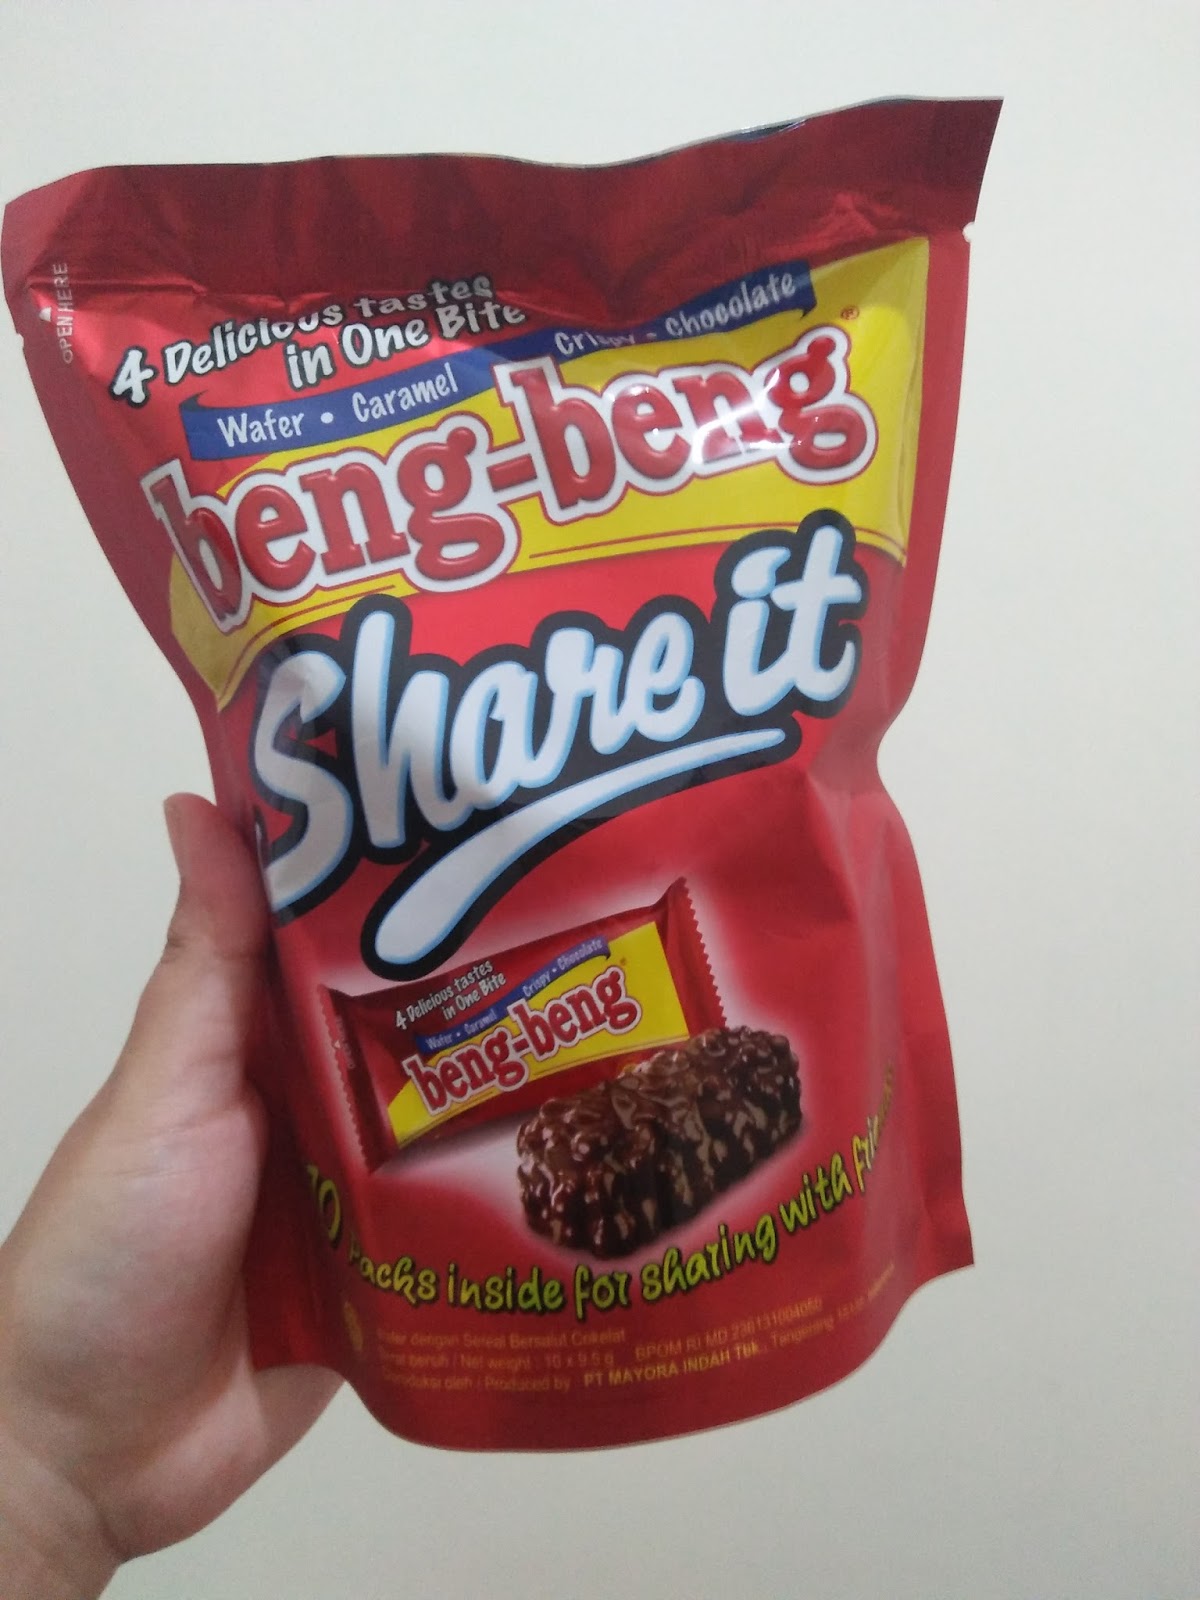 Welcome to Ditya's Blog: Review "Beng-Beng Share It"